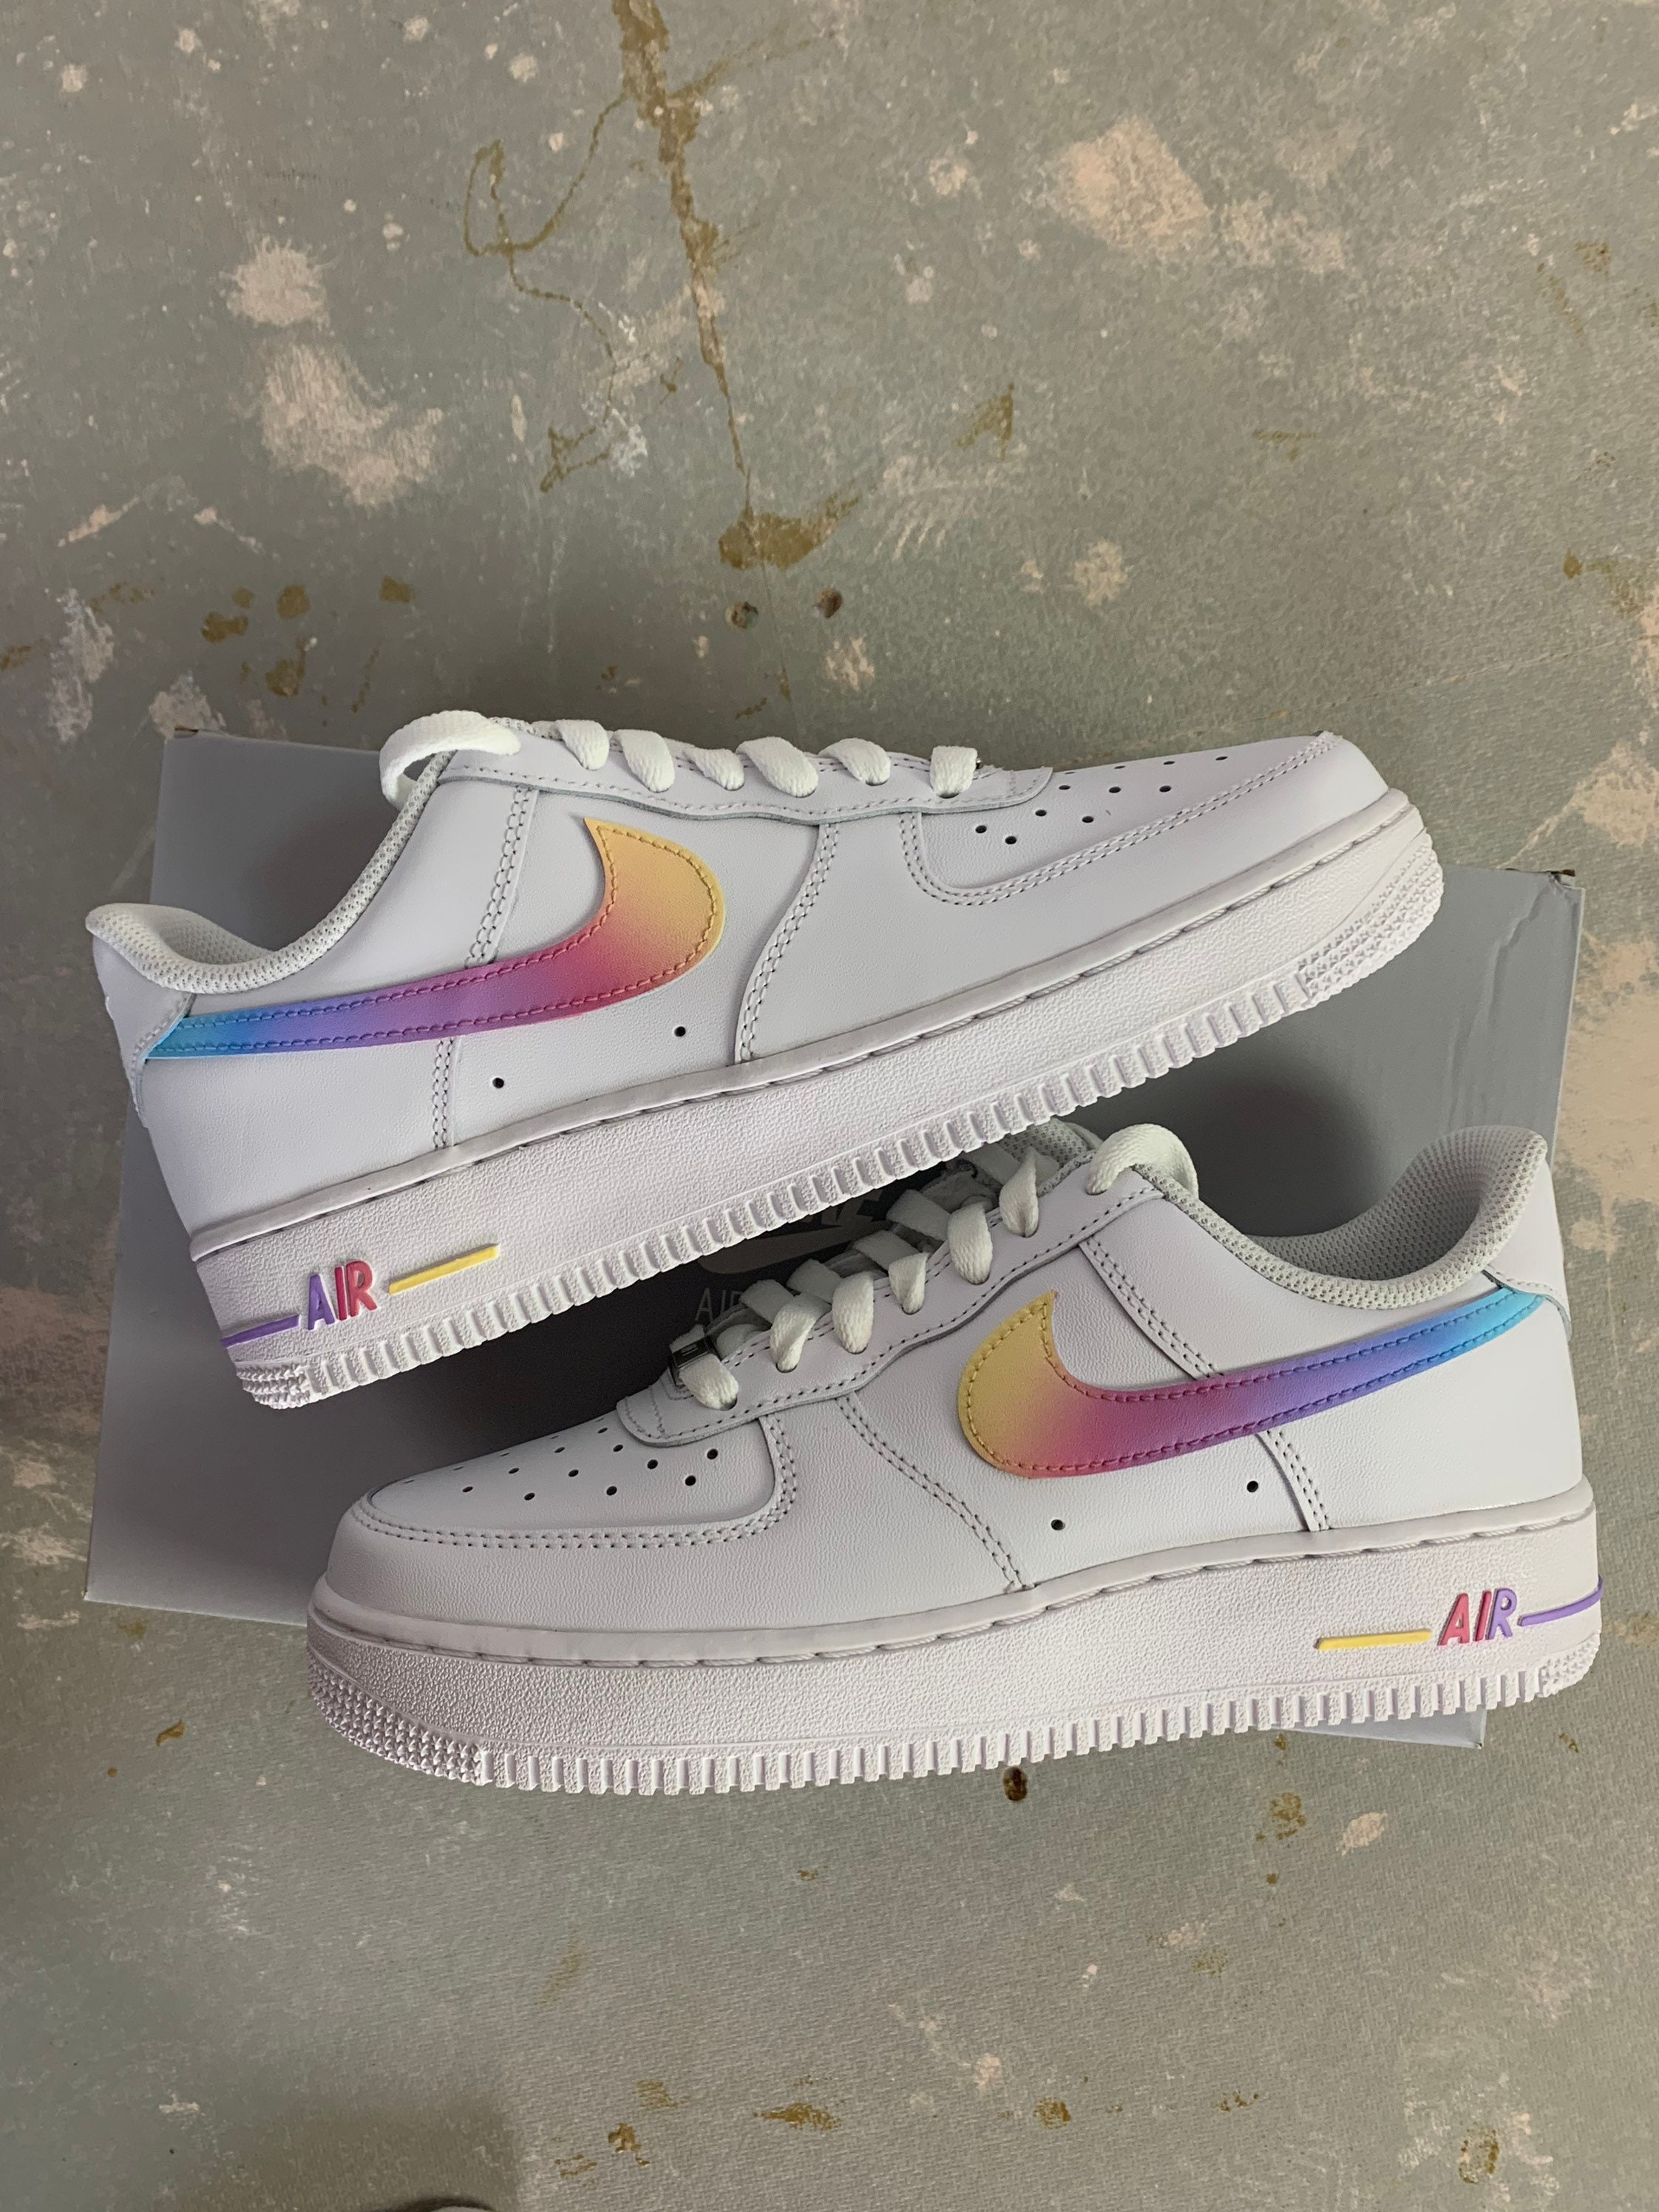 Gradient Dyed Air Force 1's